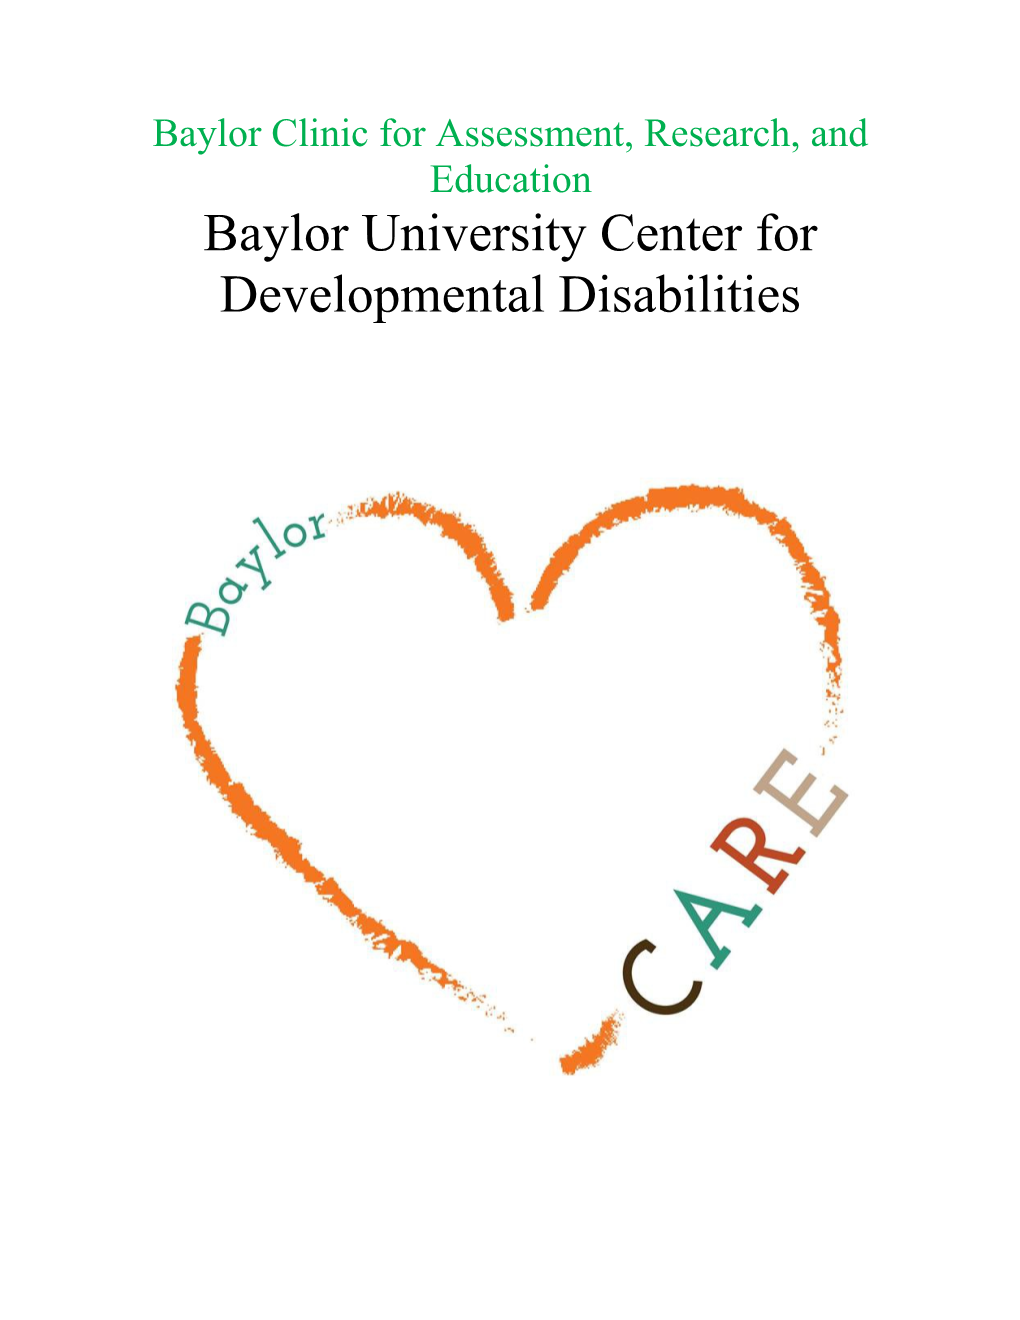 Baylor Clinic for Assessment, Research, and Education